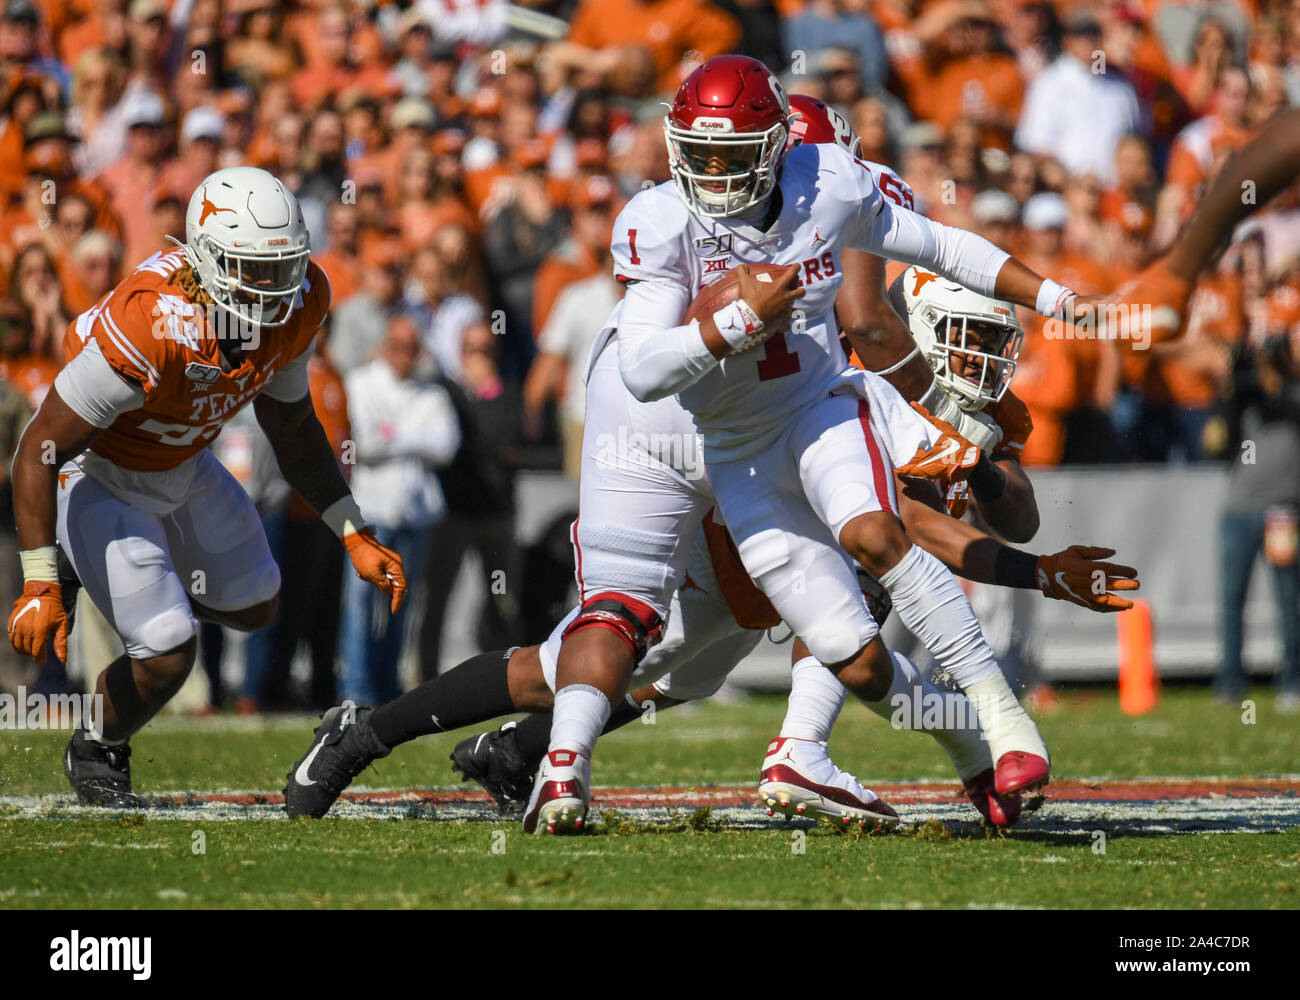 Oct 12, 2019: Oklahoma Sooners quarterback Jalen Hurts #1 passed for 235 yards and 3 touchdowns during the NCAA Red River Rivalry game between the University of Oklahoma Sooners and the University of Texas Longhorns at the Cotton Bowl Stadium at Fair Park in Dallas, TX Oklahoma defeated 34-27 Albert Pena/CSM Stock Photo